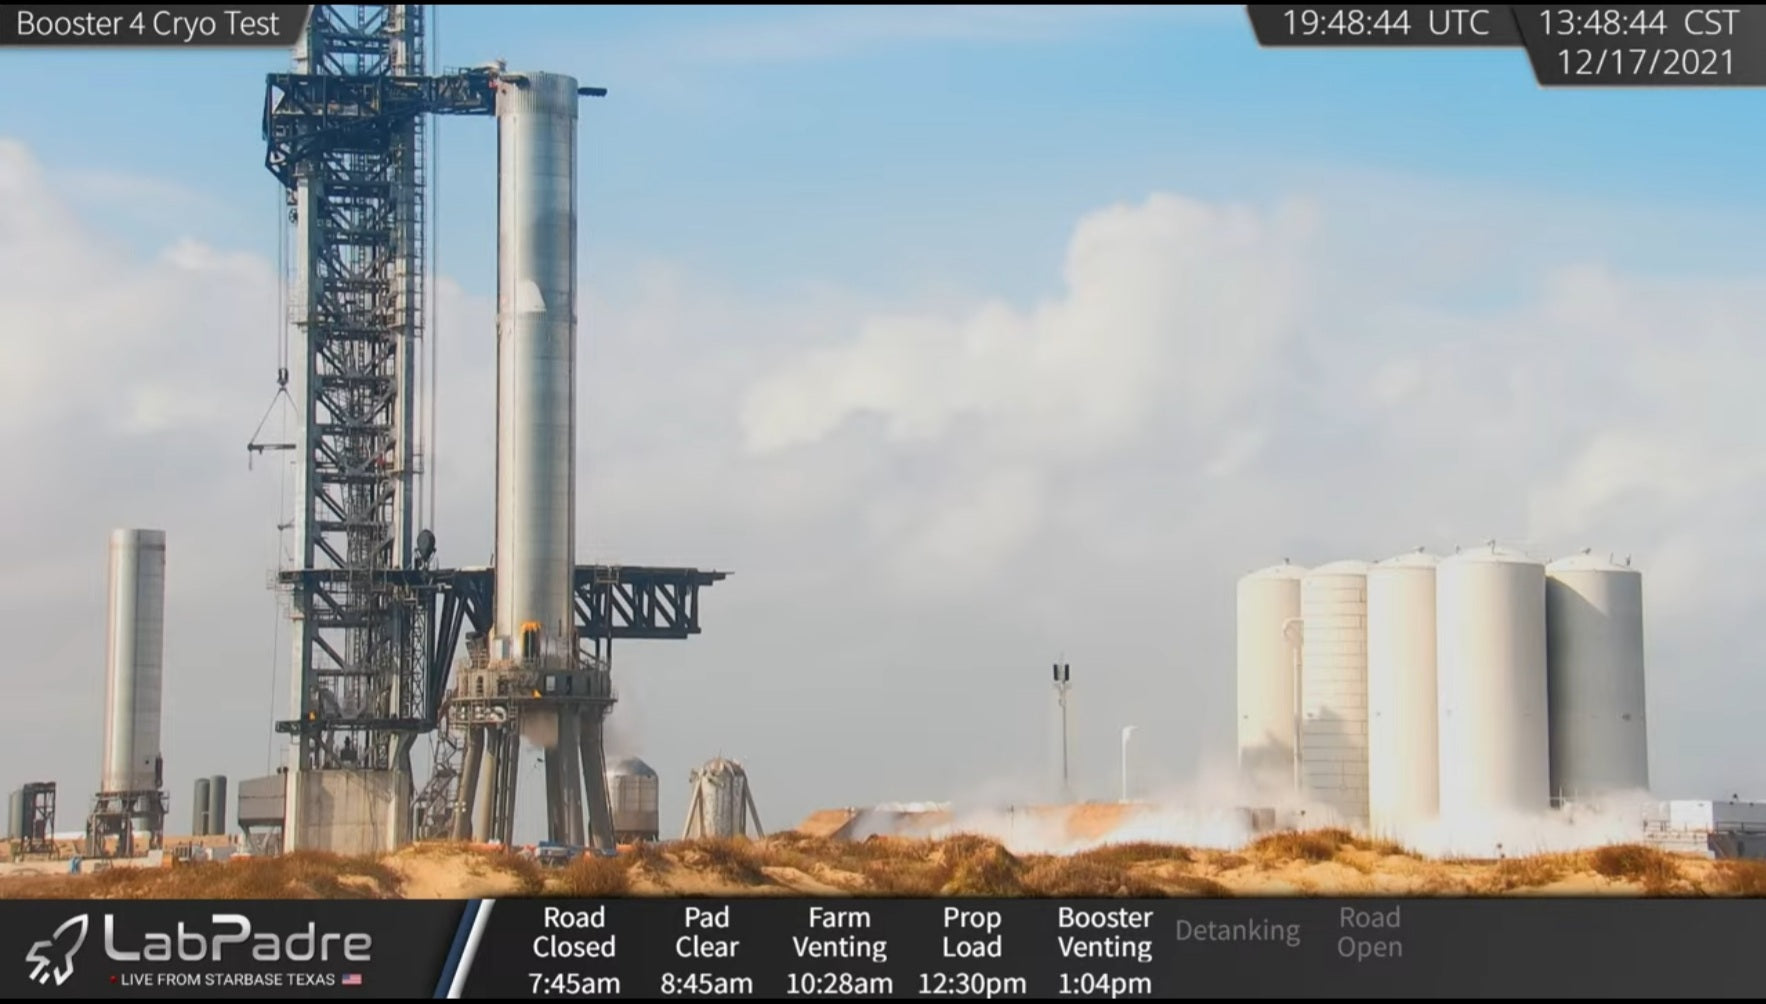 SpaceX Performs First Cryogenic Proof Test Of Super Heavy Rocket That Will Propel A Starship To Orbit